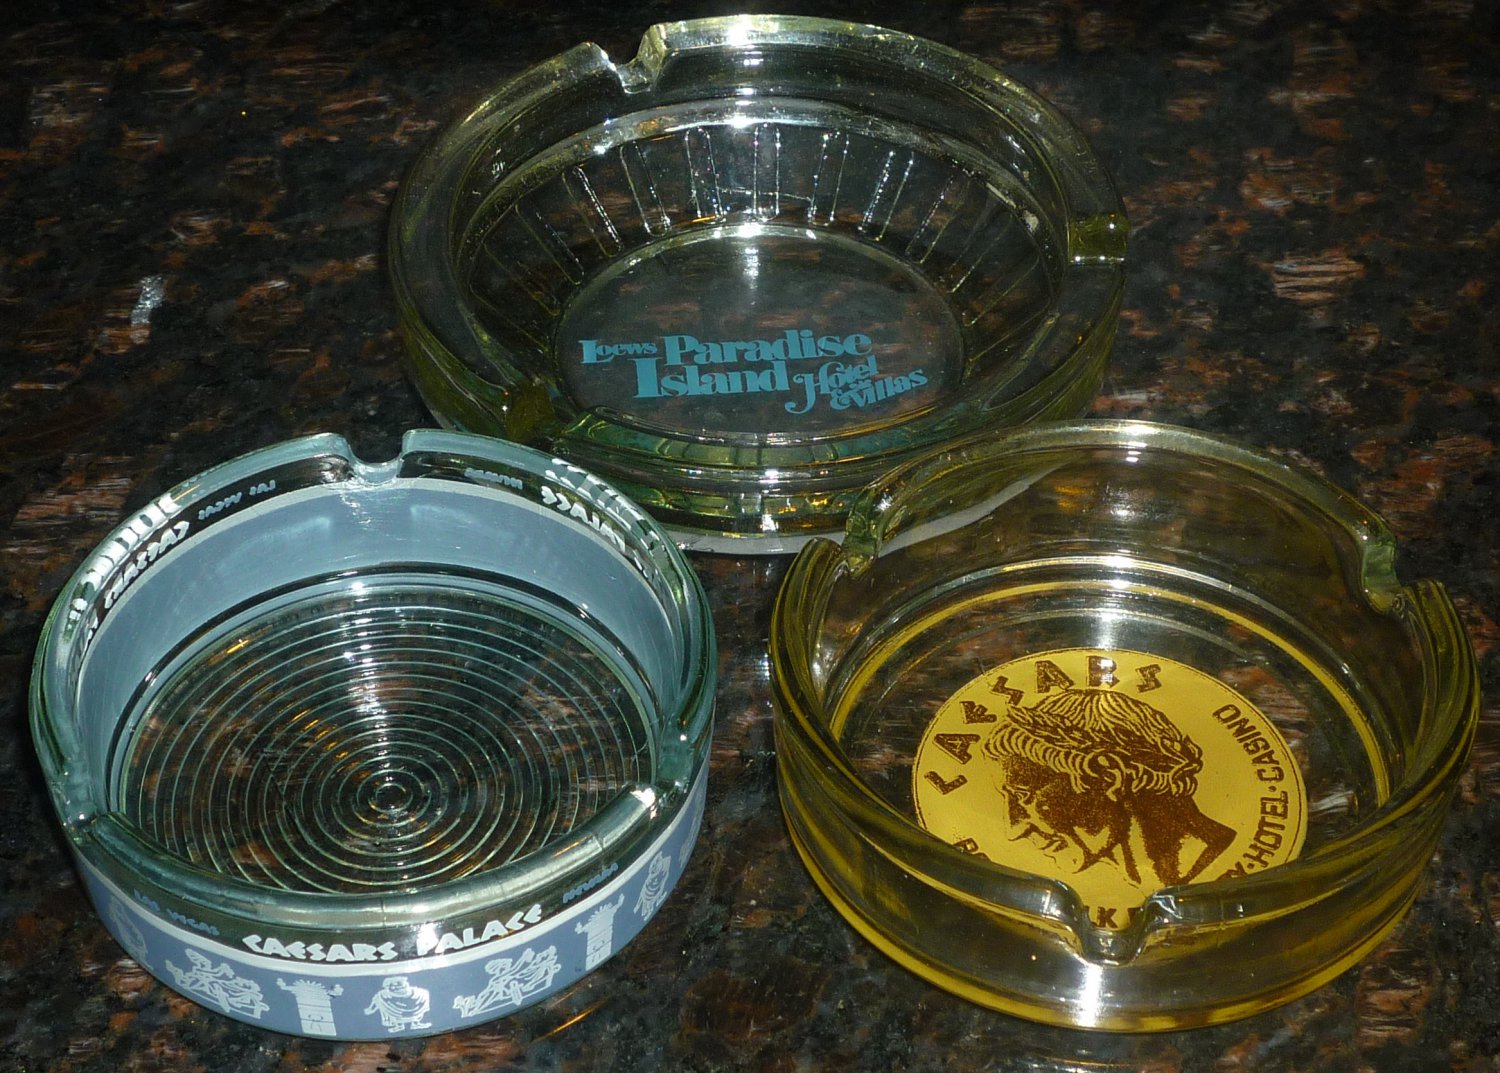 VINTAGE GLASS COLLECTIBLES HOTEL'S ASHTRAYS LOT OF 3 CASINO LAS VEGAS